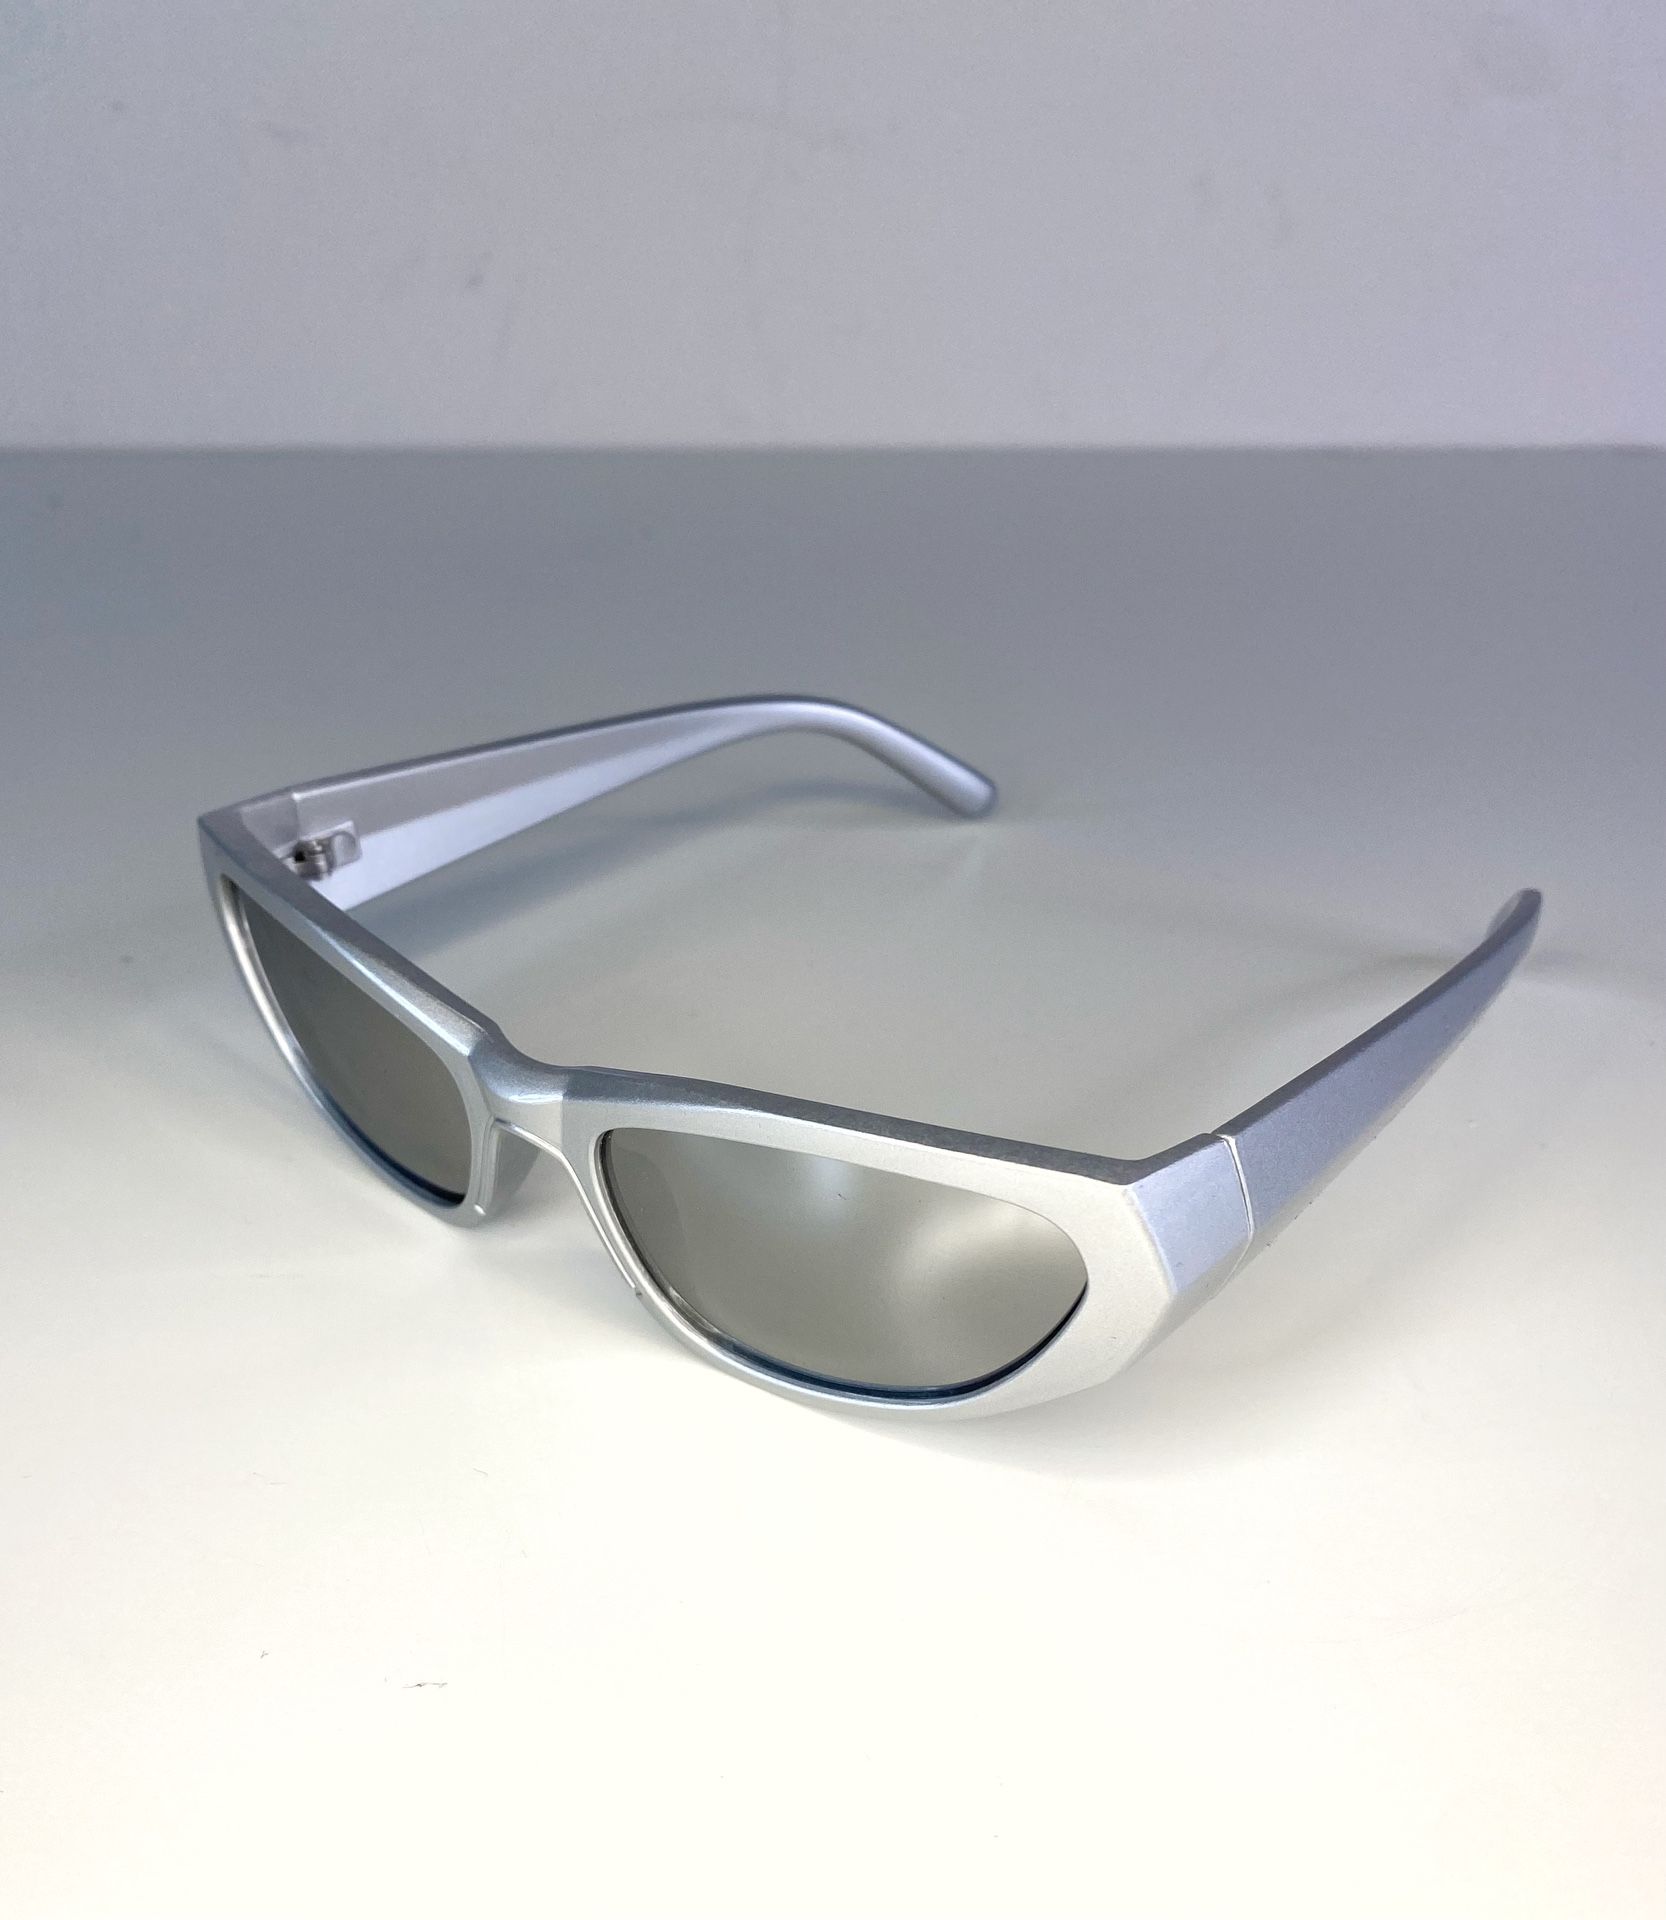 Silver Sunglasses For Sale- Fast Shipping Available (Tampa)